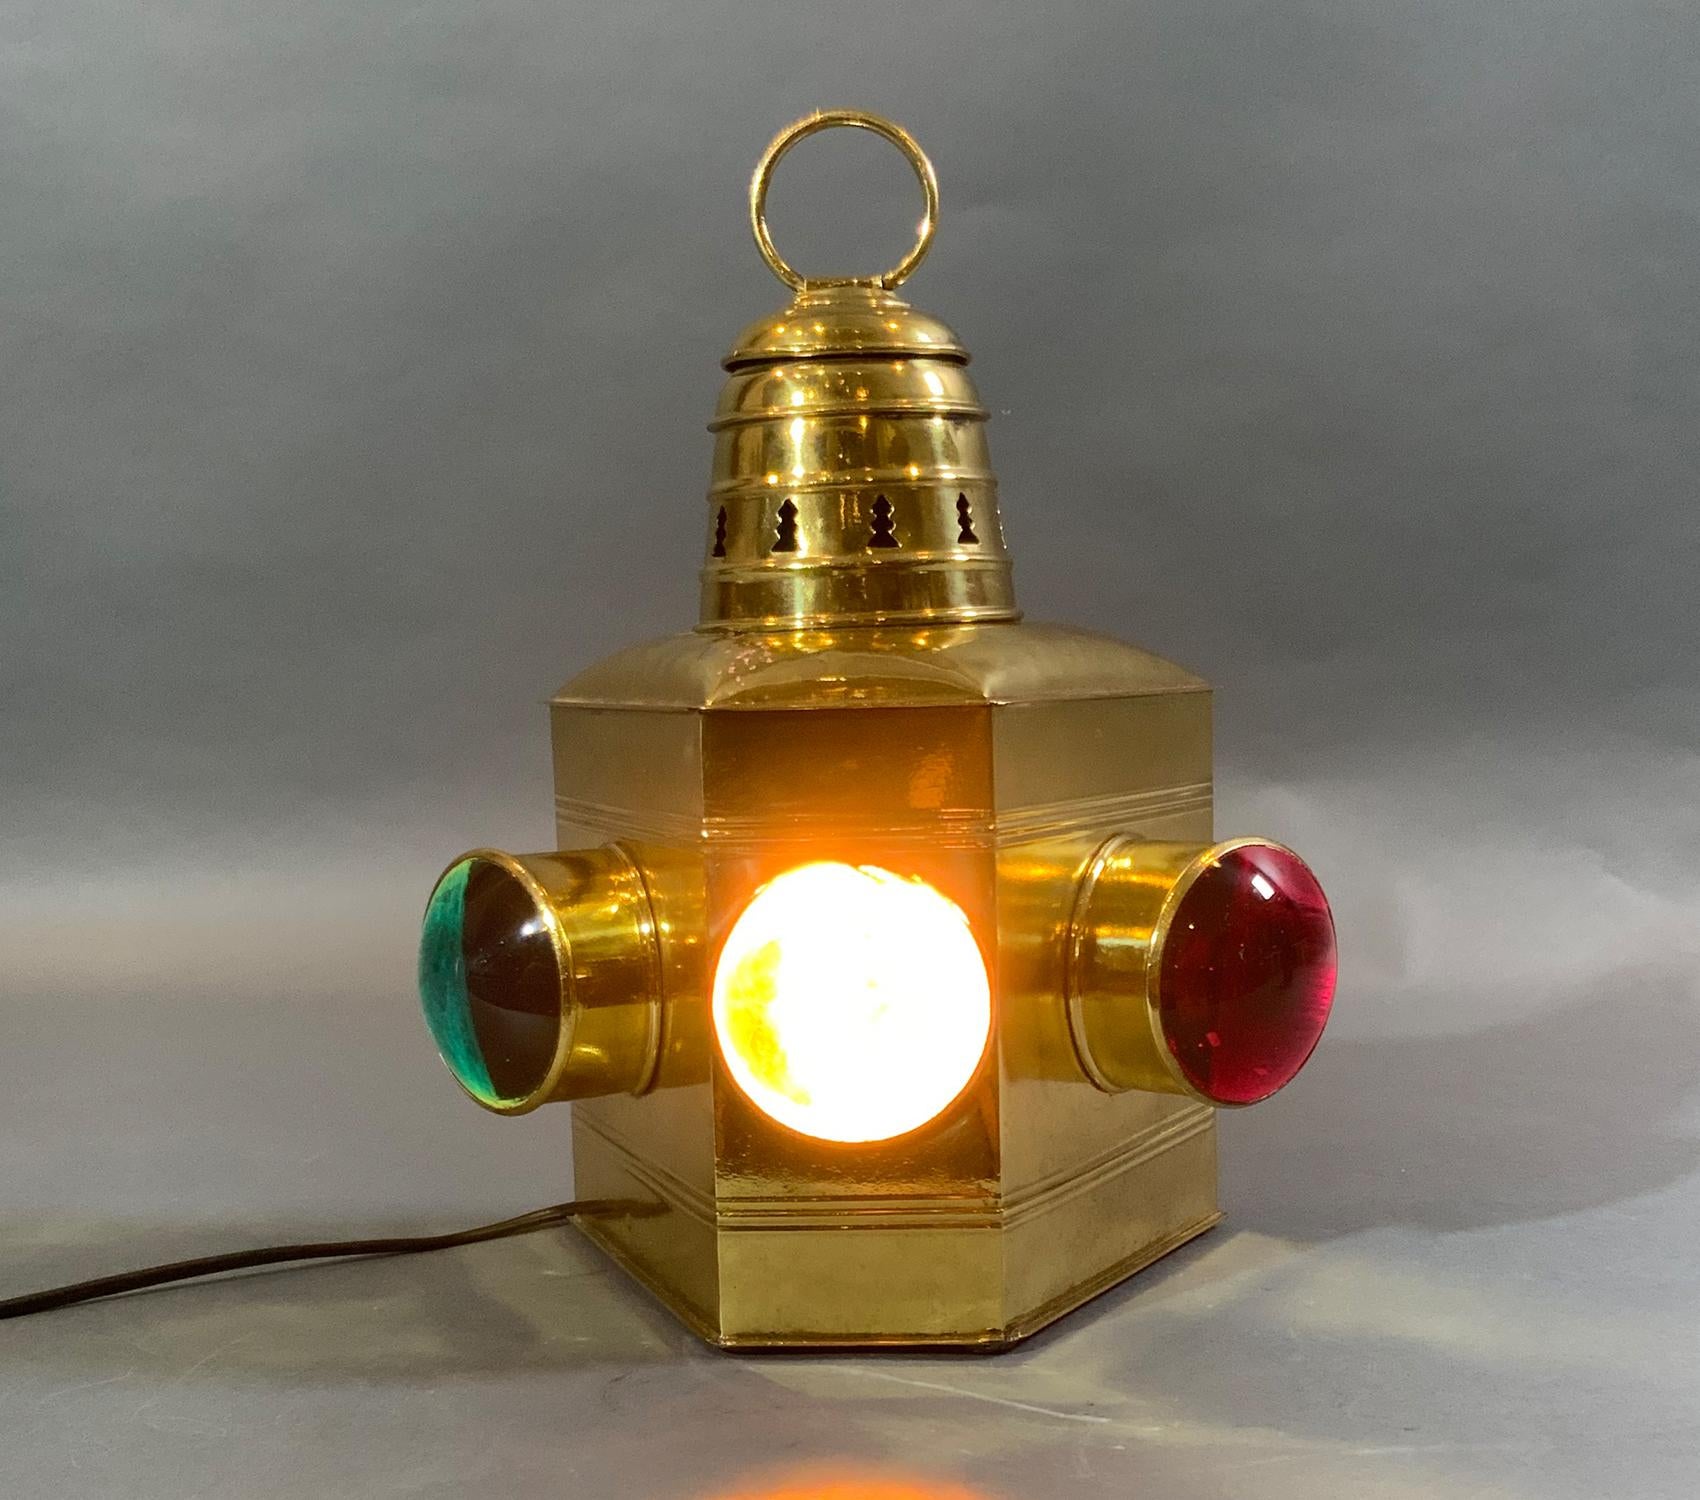 Polished brass boat lantern with three bulls eye lenses, red, green and clear. Highly polished. Fitted with a fresh socket for home use. Hinged door to rear.

Weight: 7 lbs
Overall Dimensions: 12